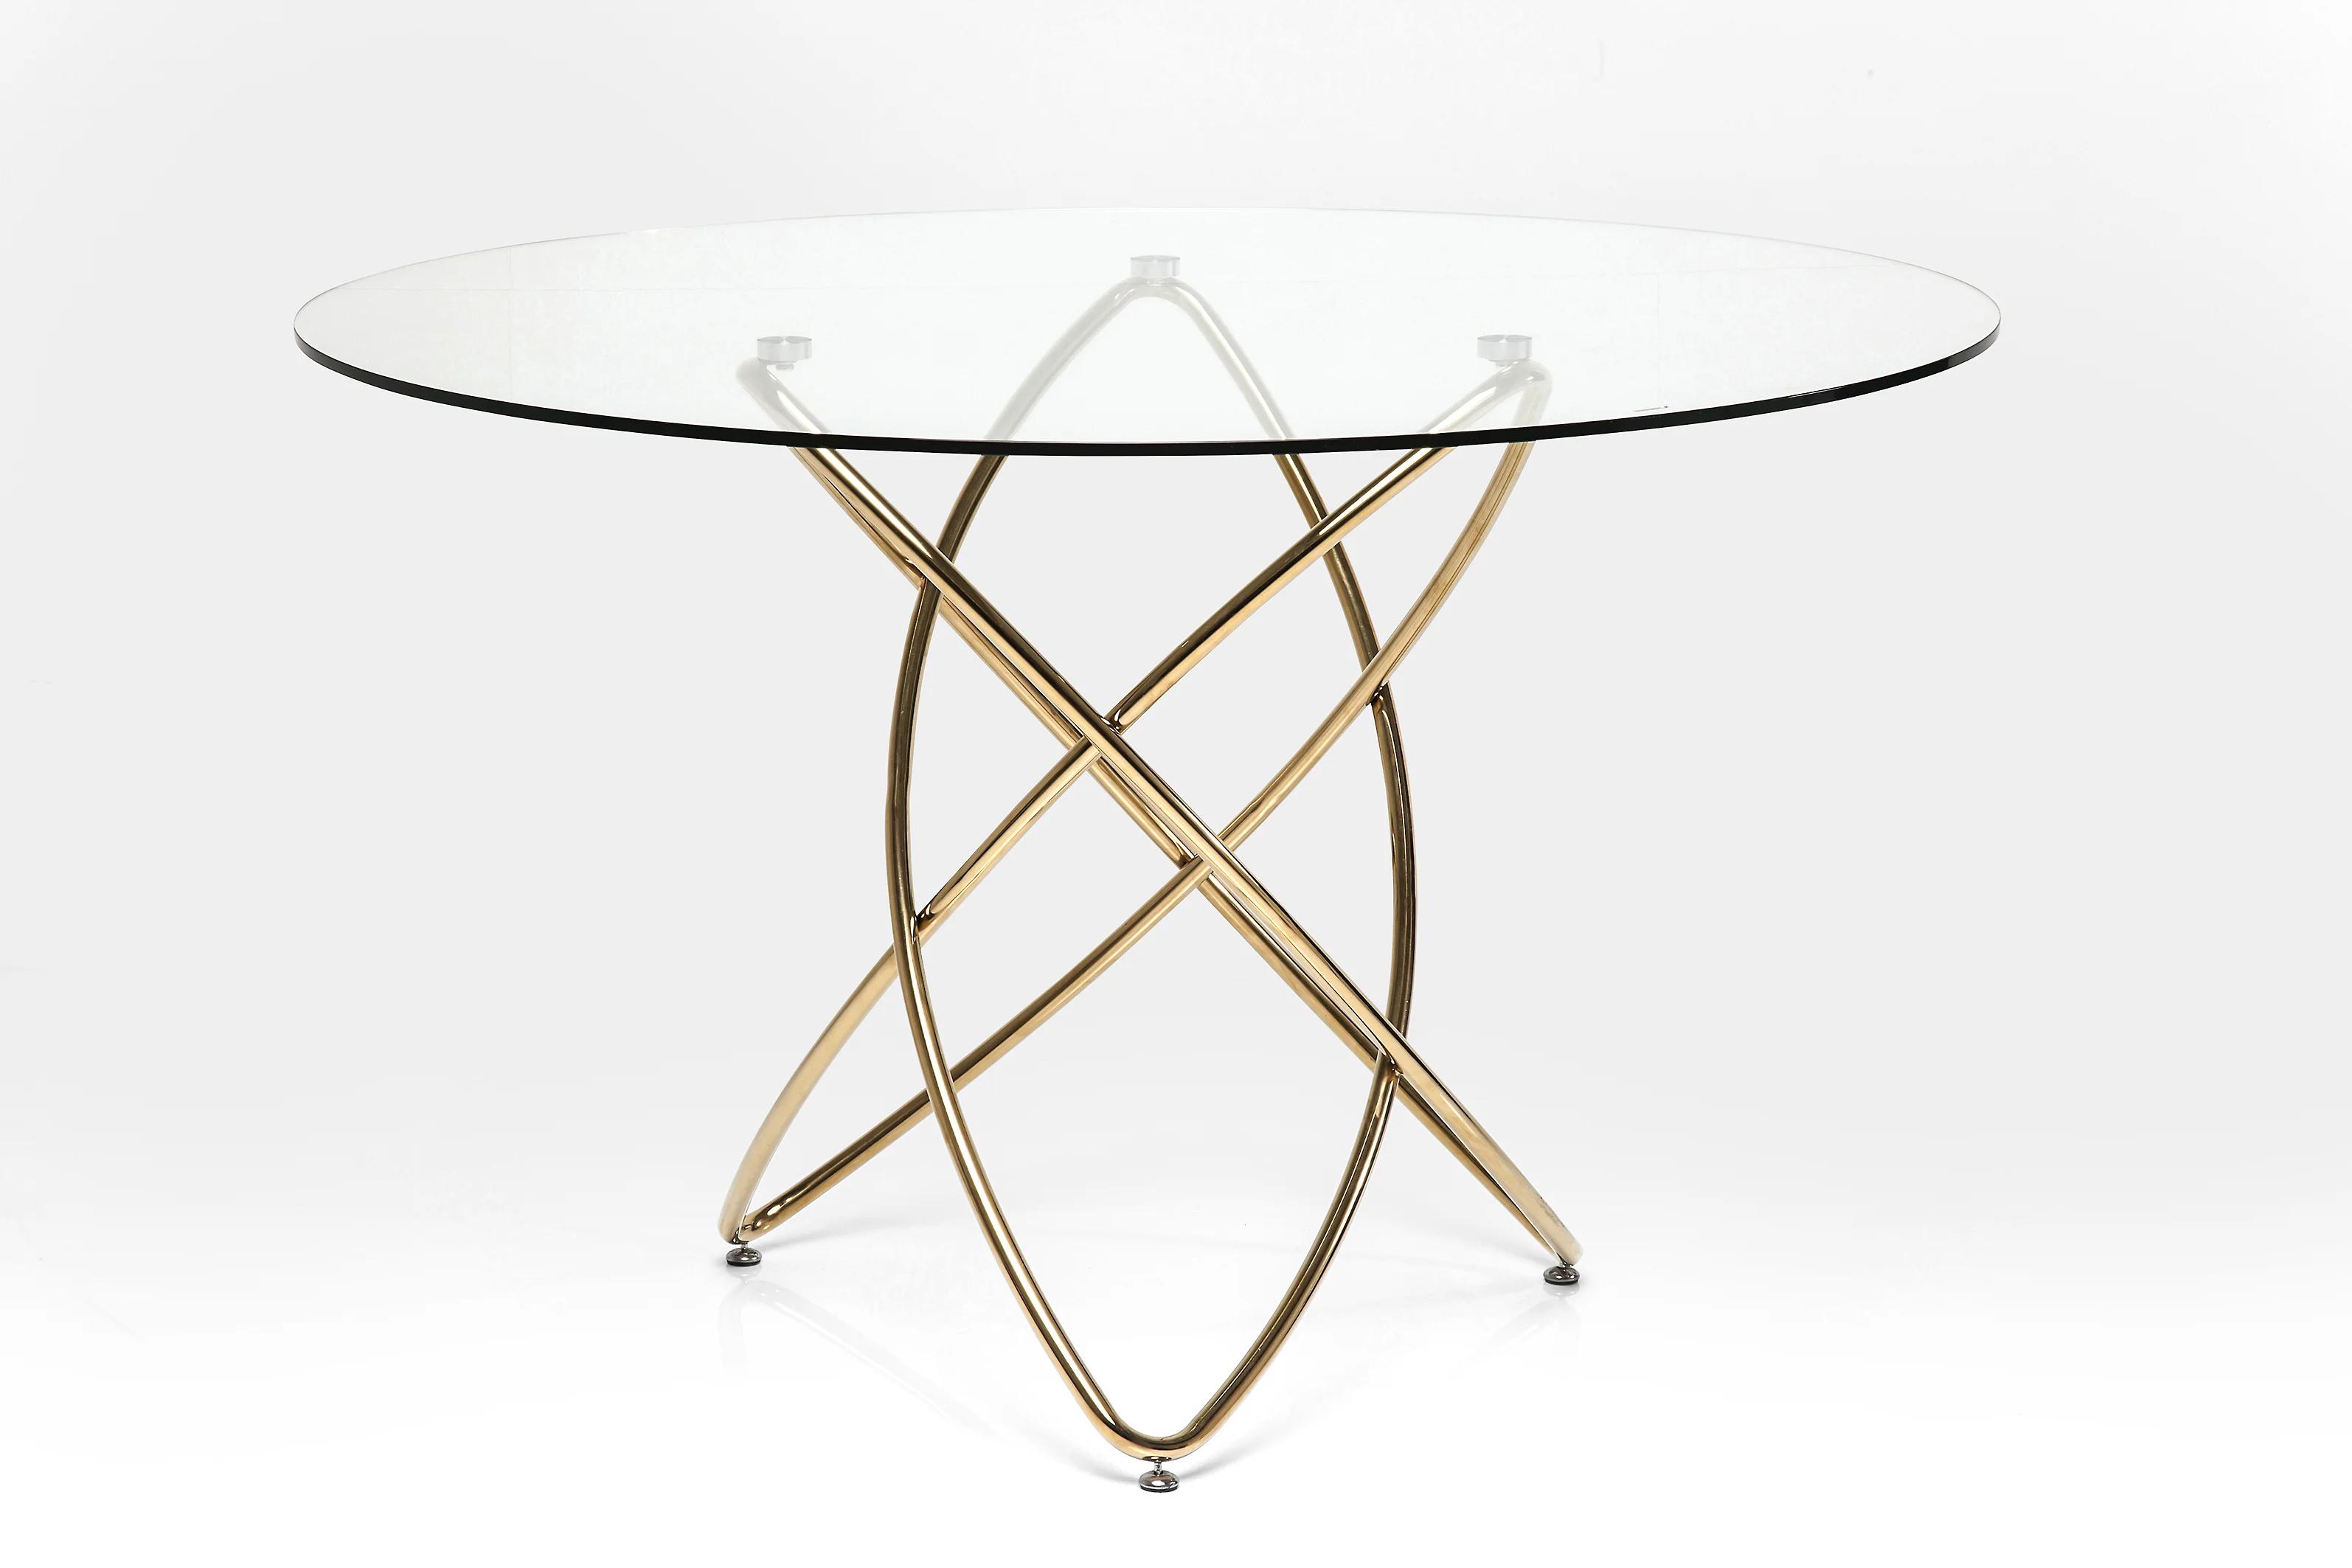 Modern Dining Table Rosario VGVCT8979 in Gold, Black 